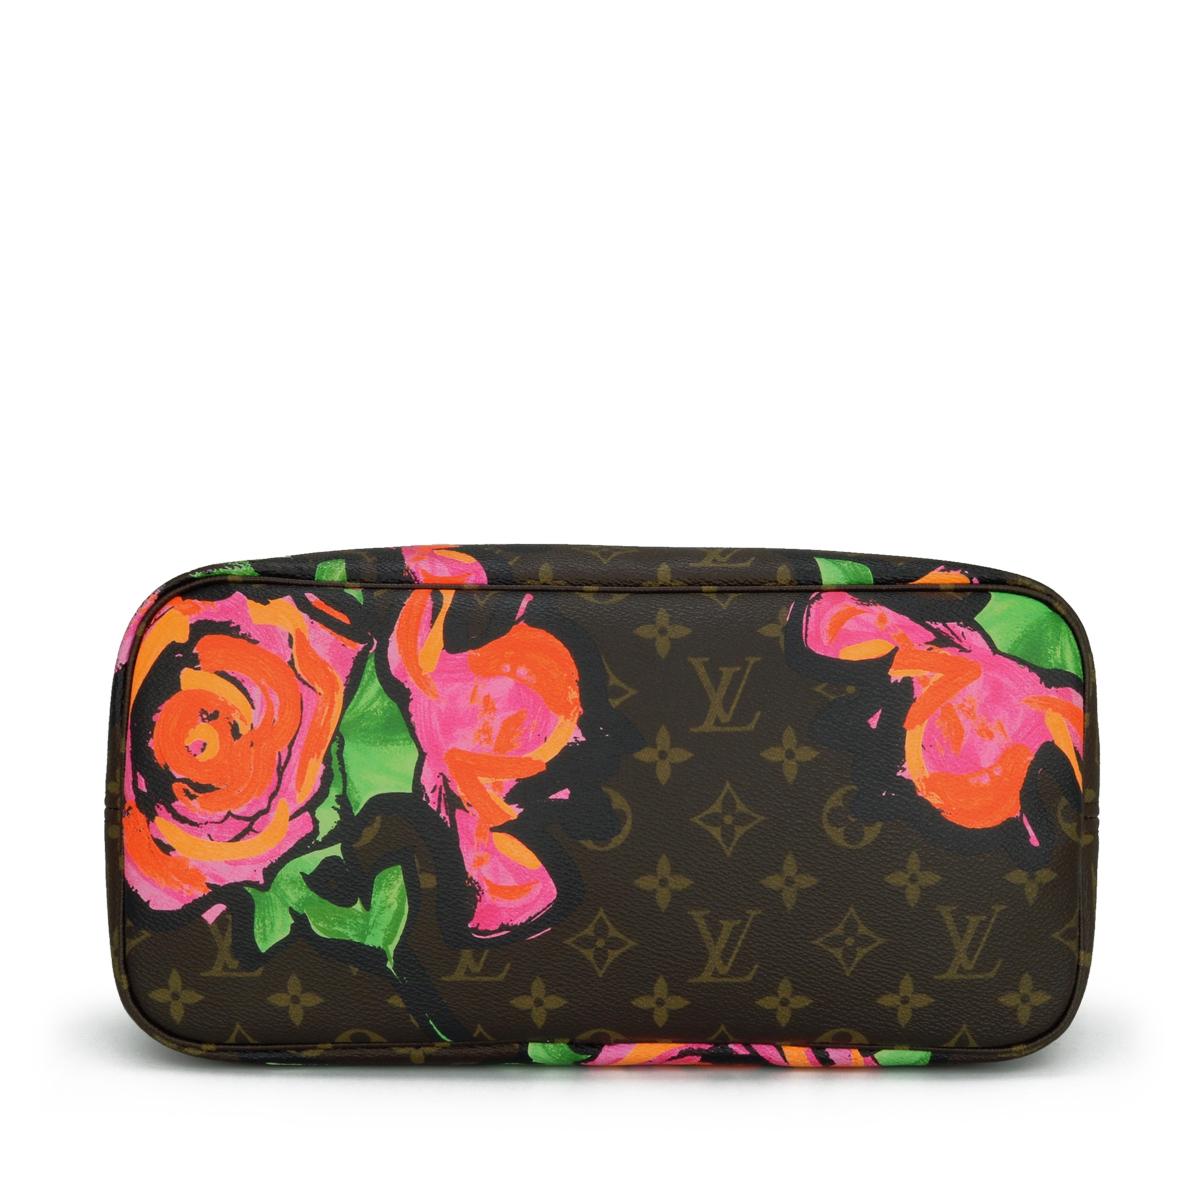 Louis Vuitton Neverfull MM Bag in Monogram Roses 2009 Limited Edition For Sale 4